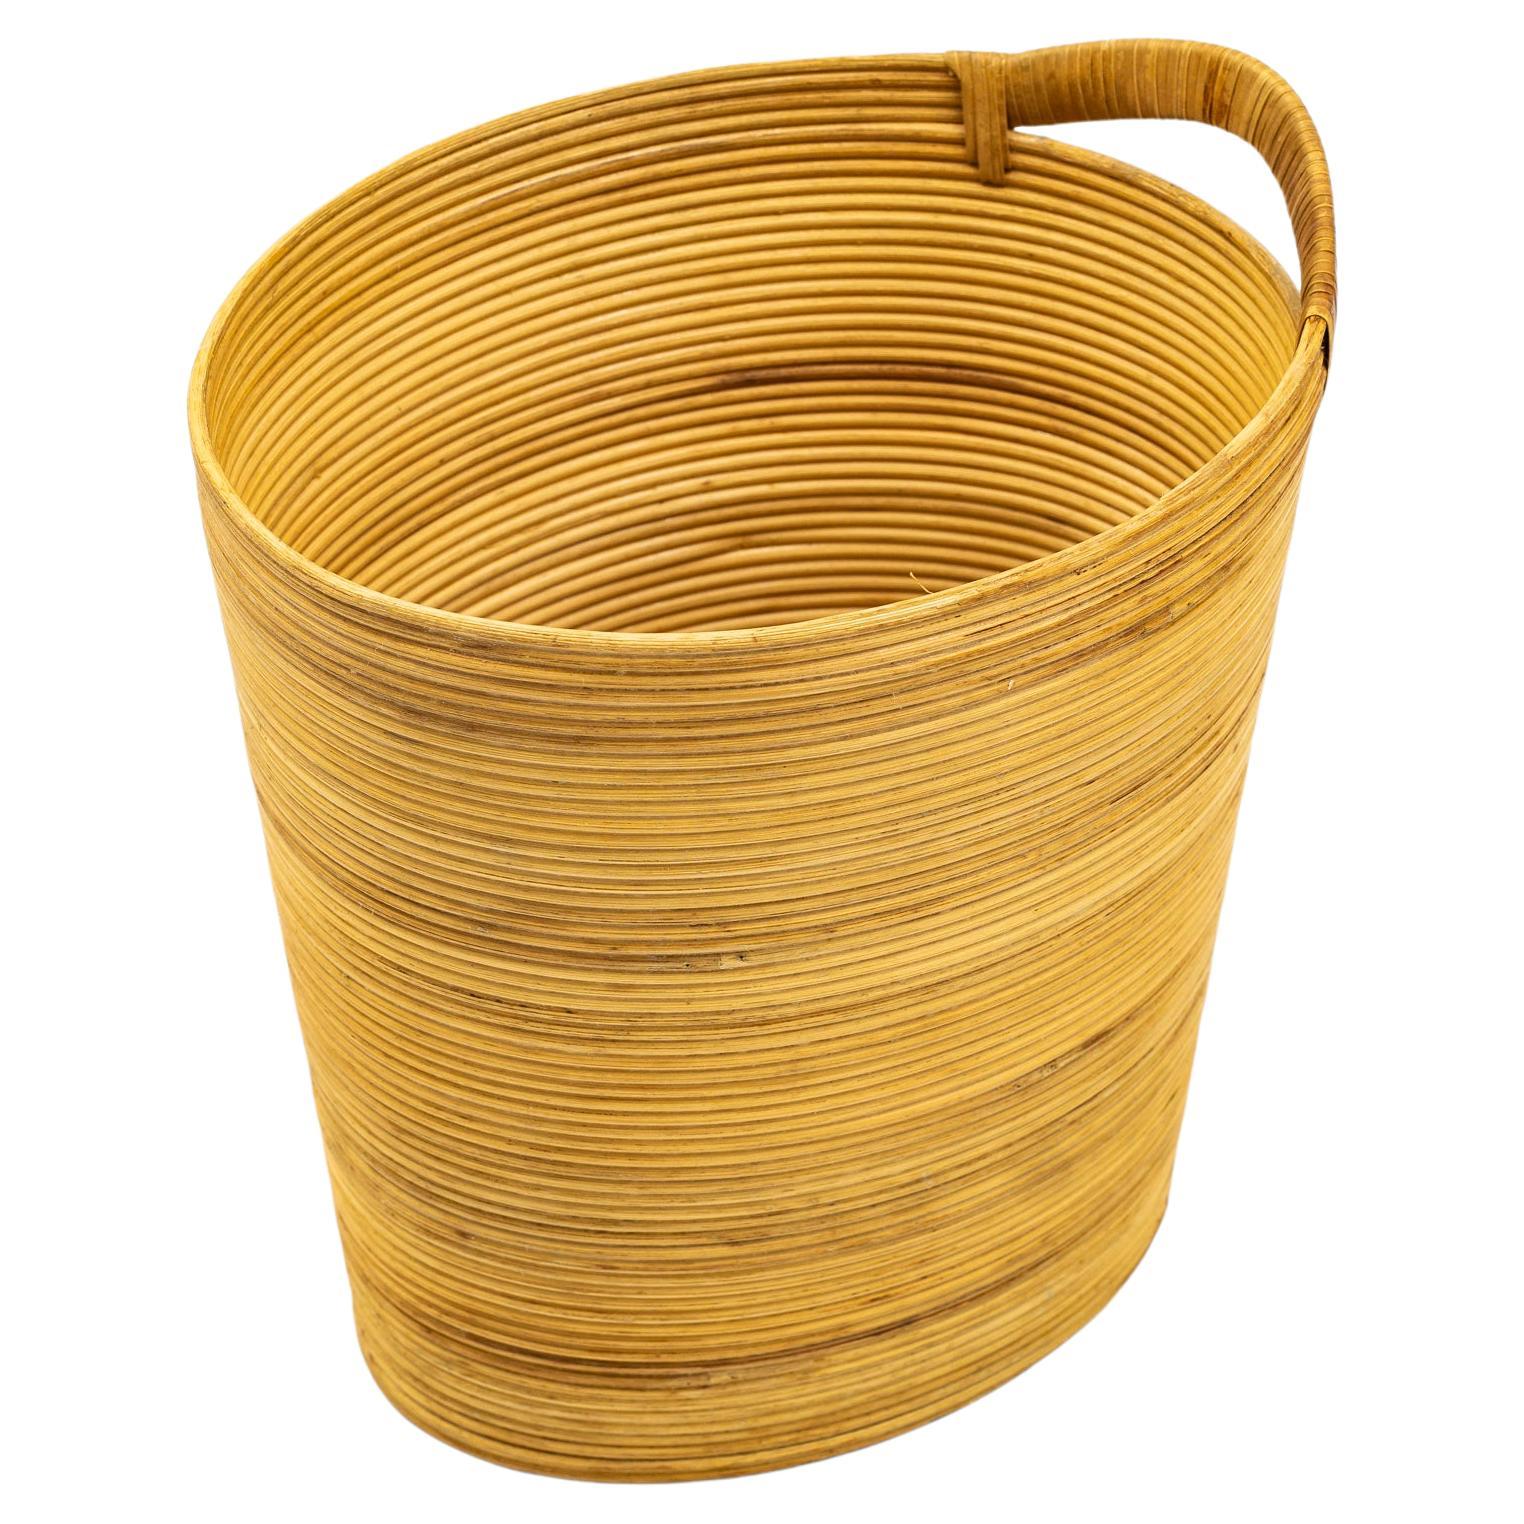 Papper Basket Designed and Manufactured by Laurids Lønborg in Denmark, 1950s For Sale